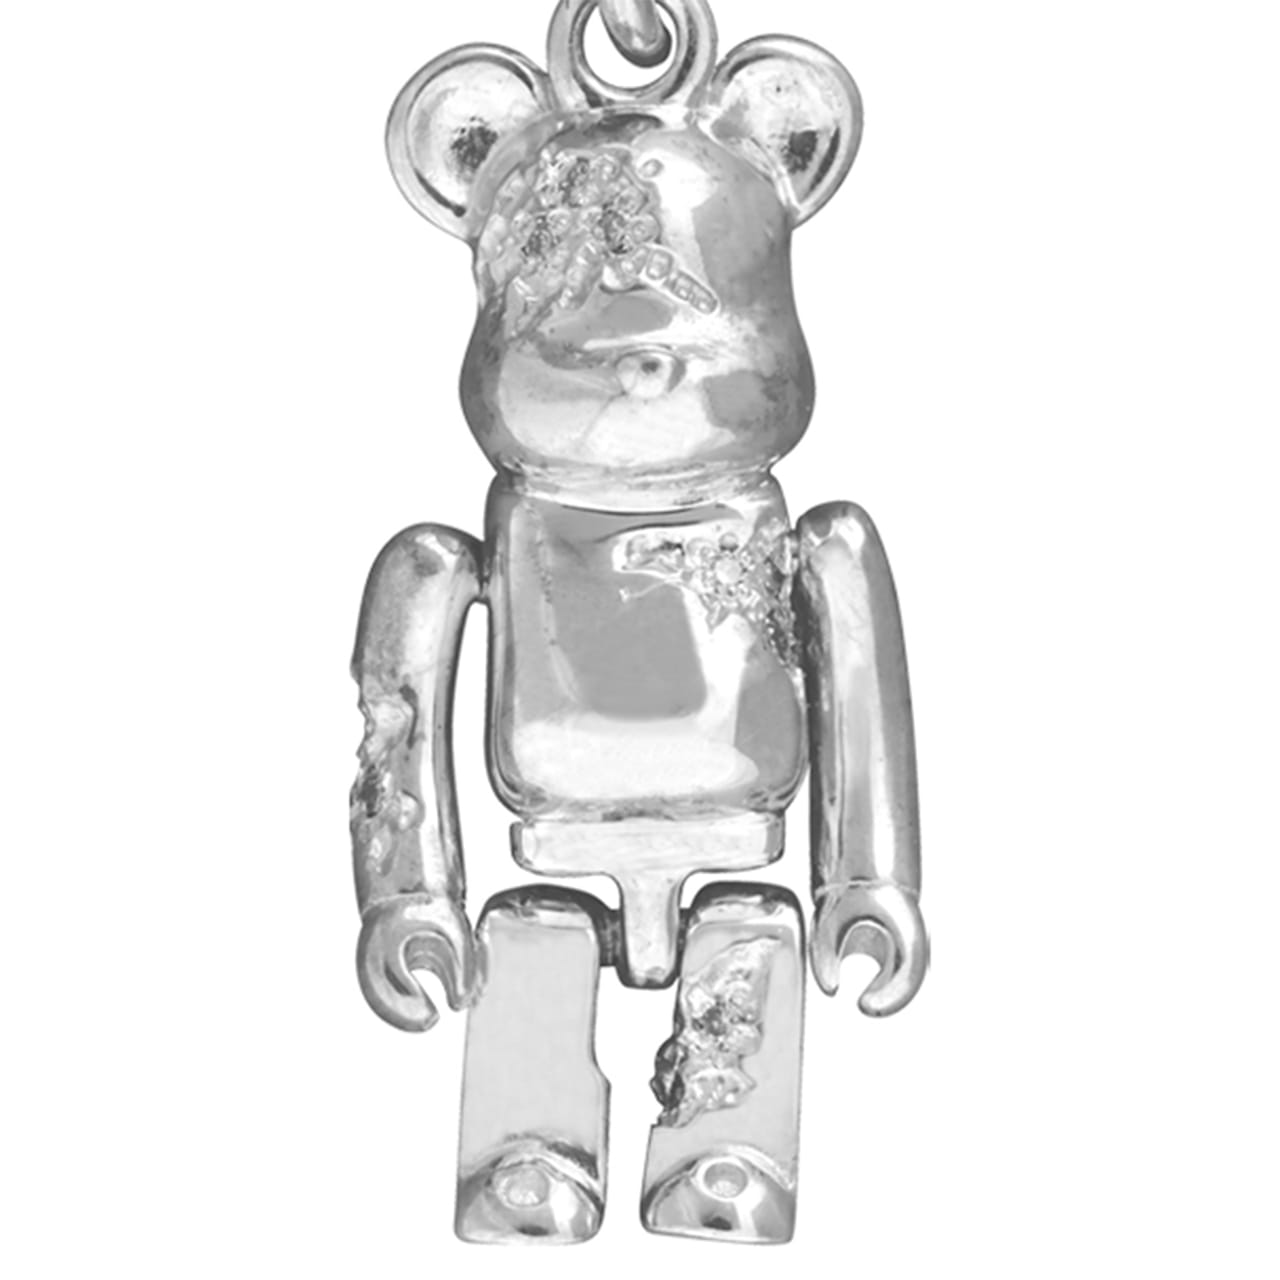 IVXLCDM × BE@RBRICK Cracked Necklace Silver